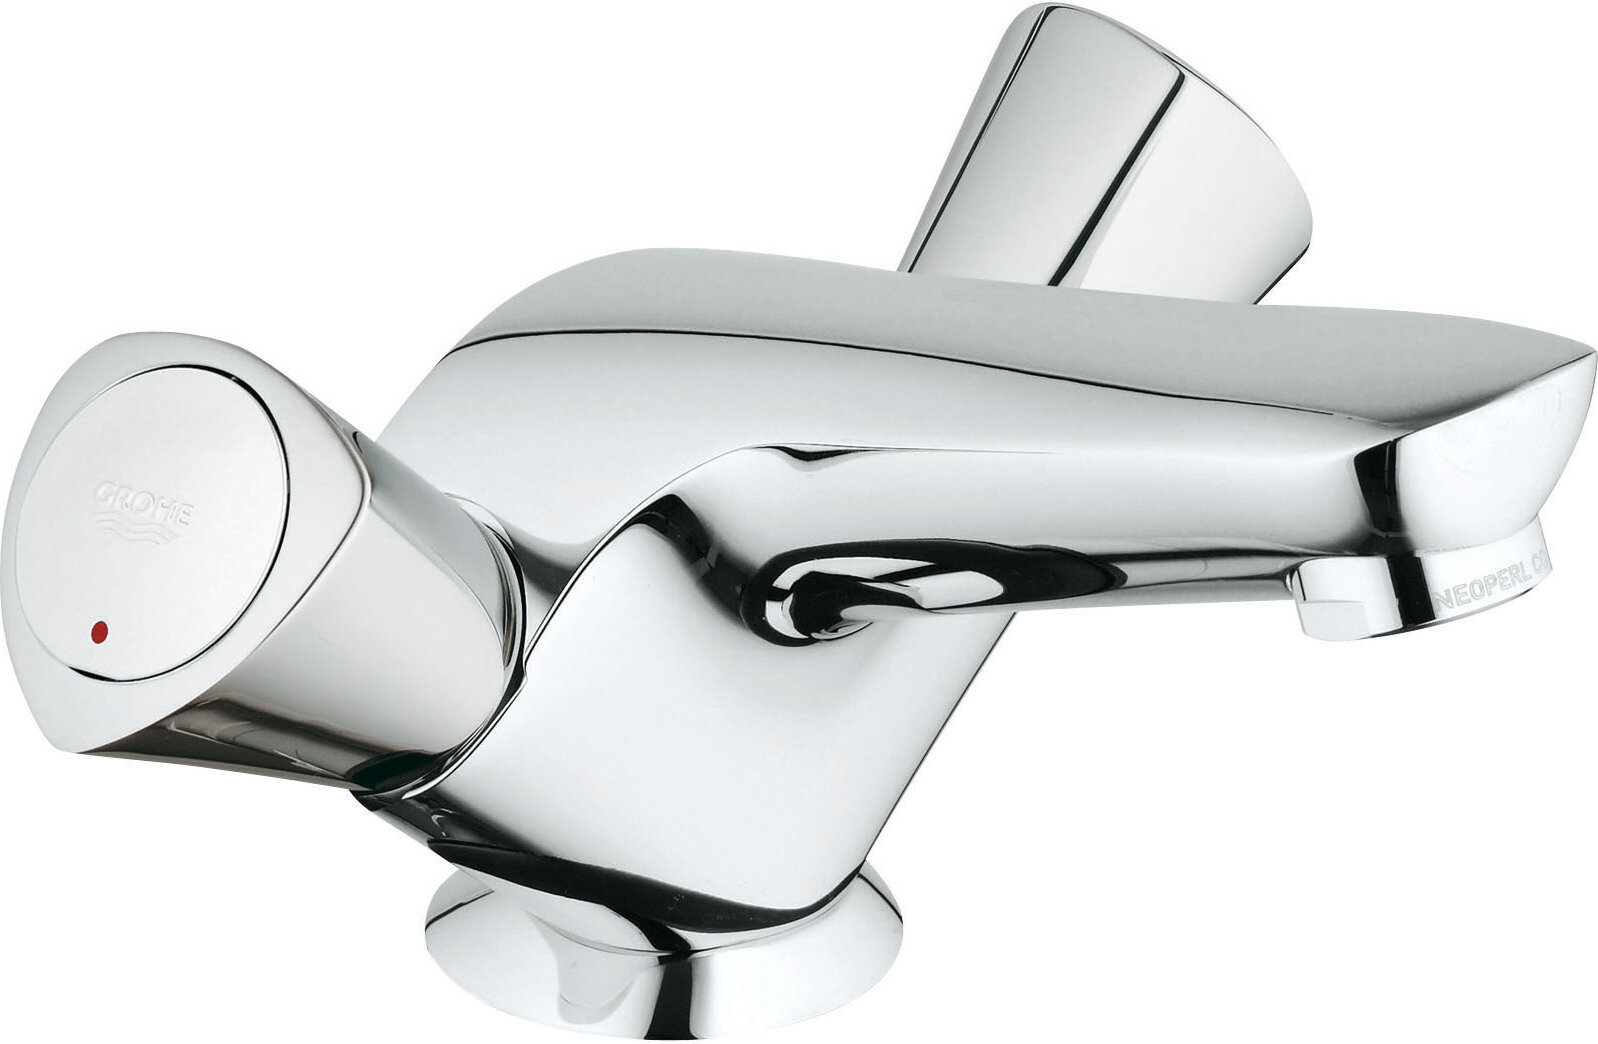  Grohe Costa S 21255001  